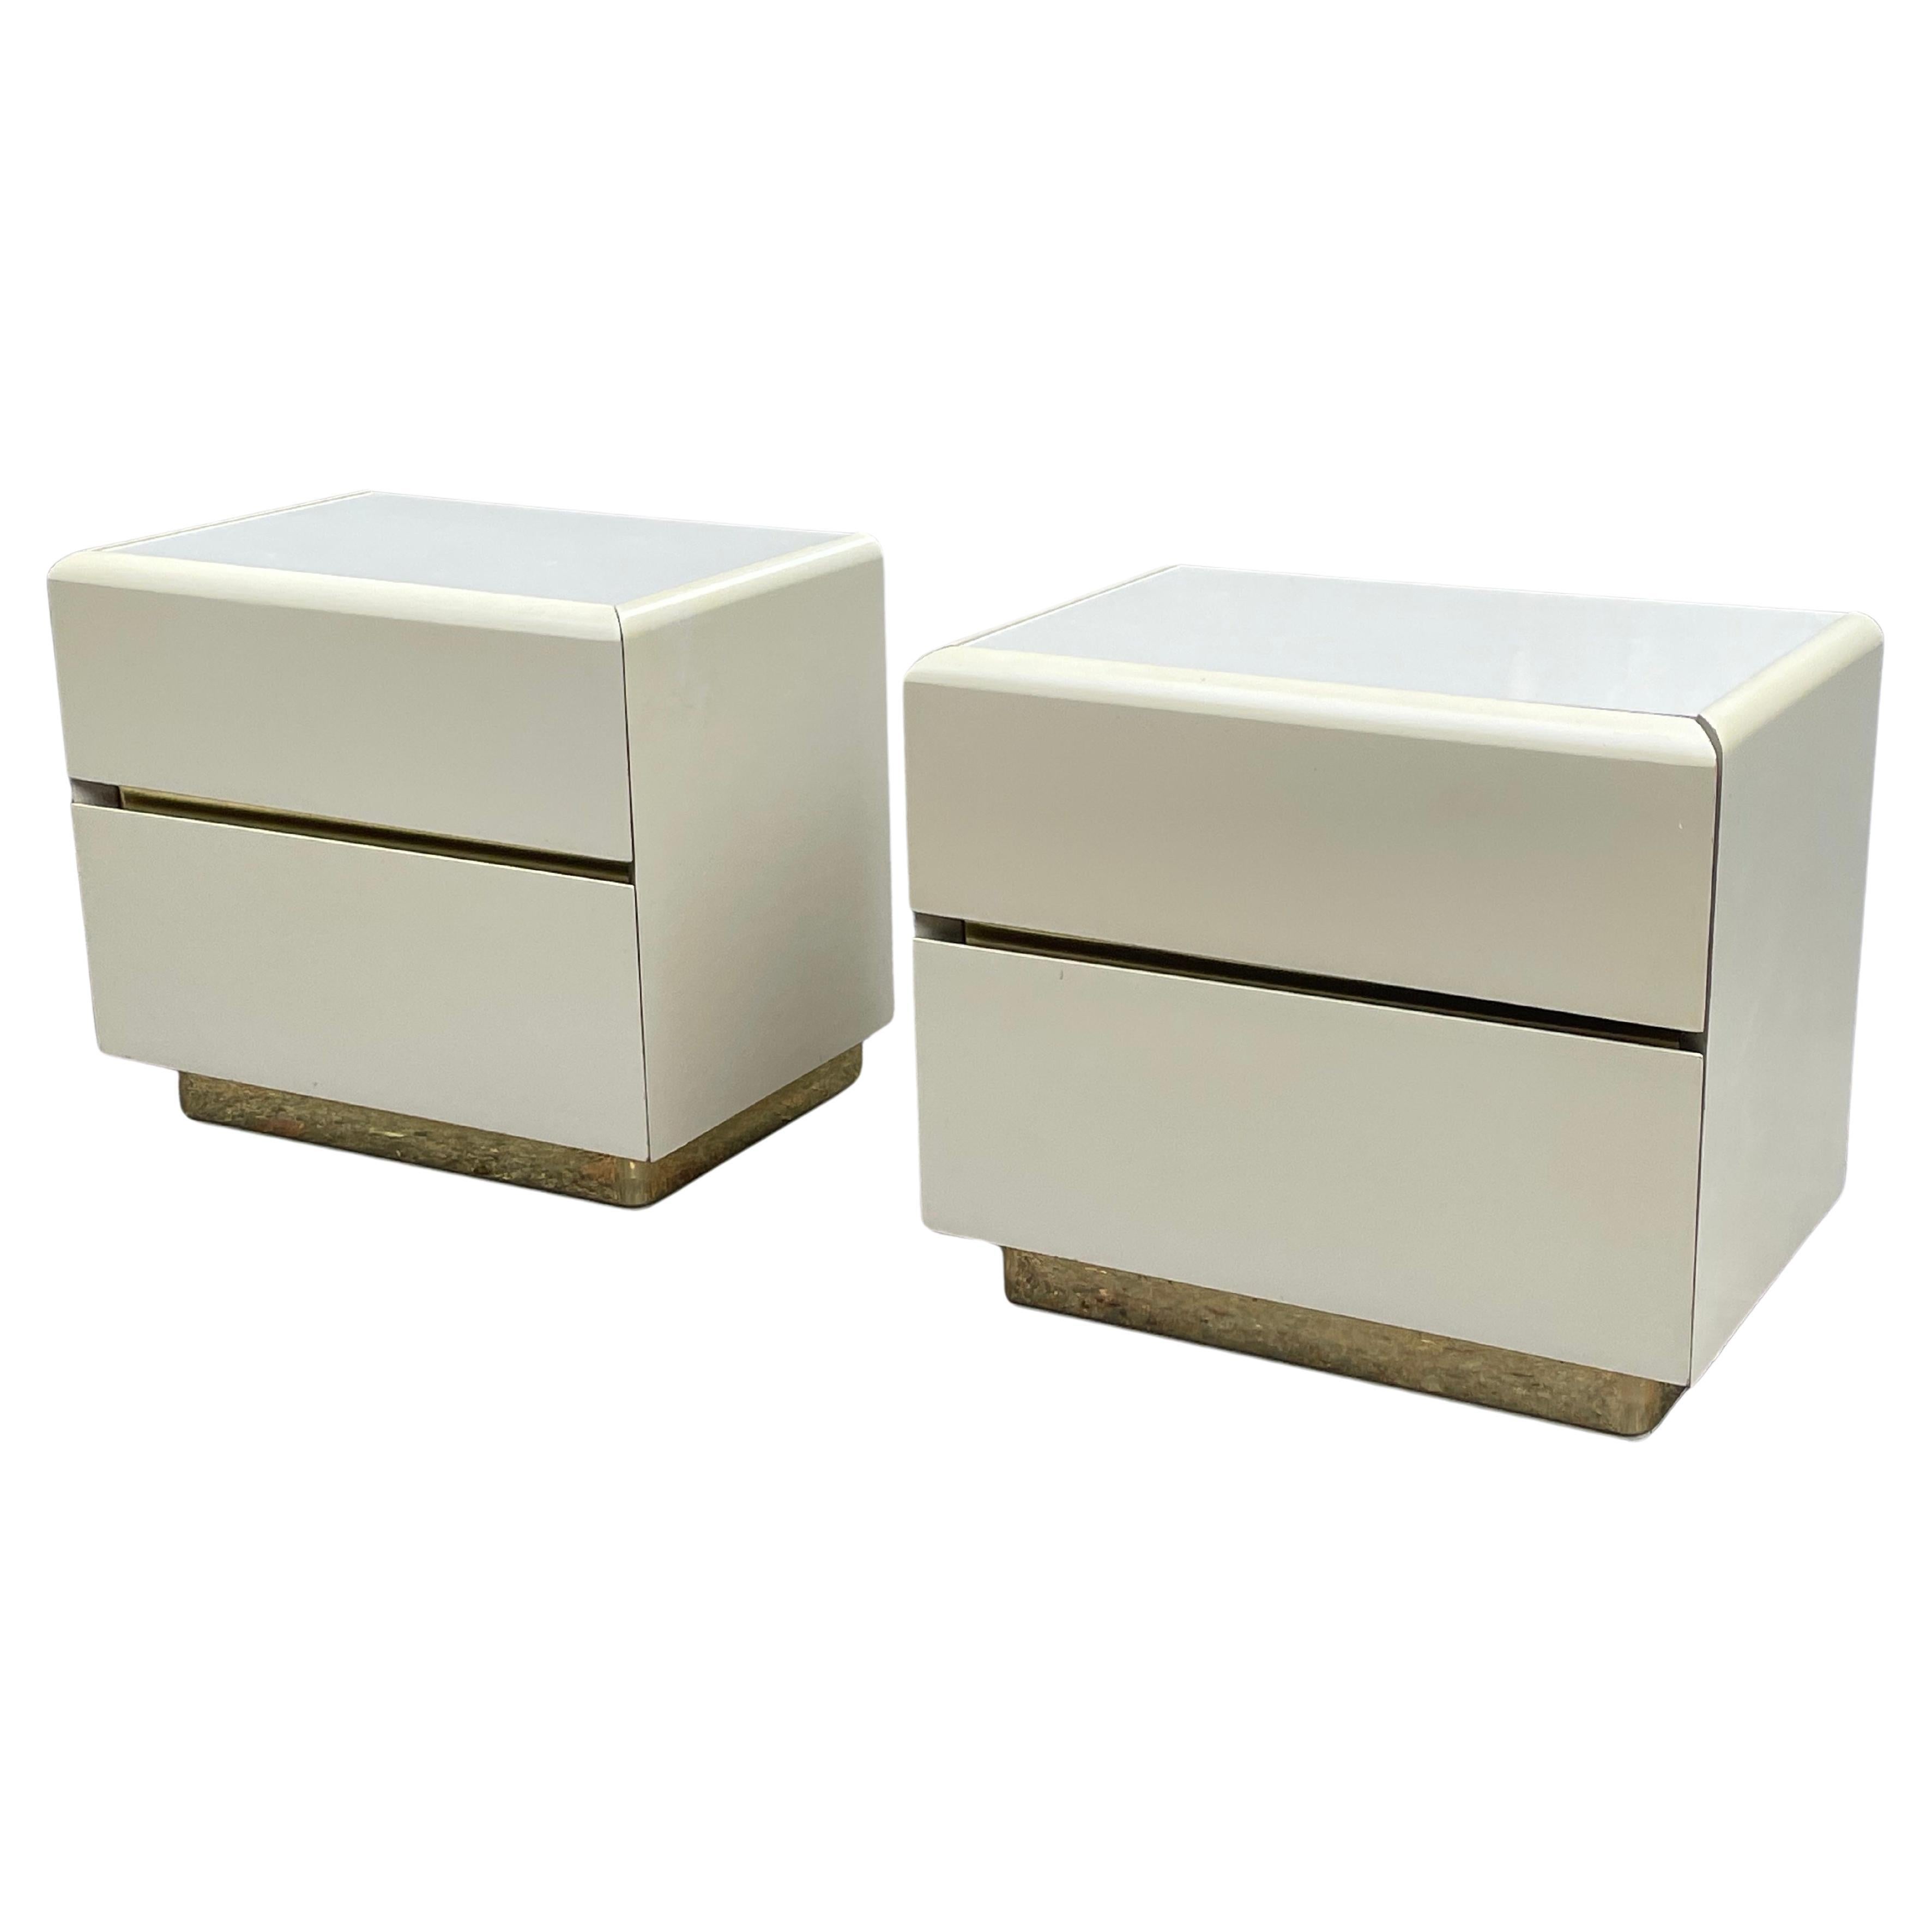 American Post-Modern Pair of Cream and Brass Lacquer 1980s Nightstands For Sale